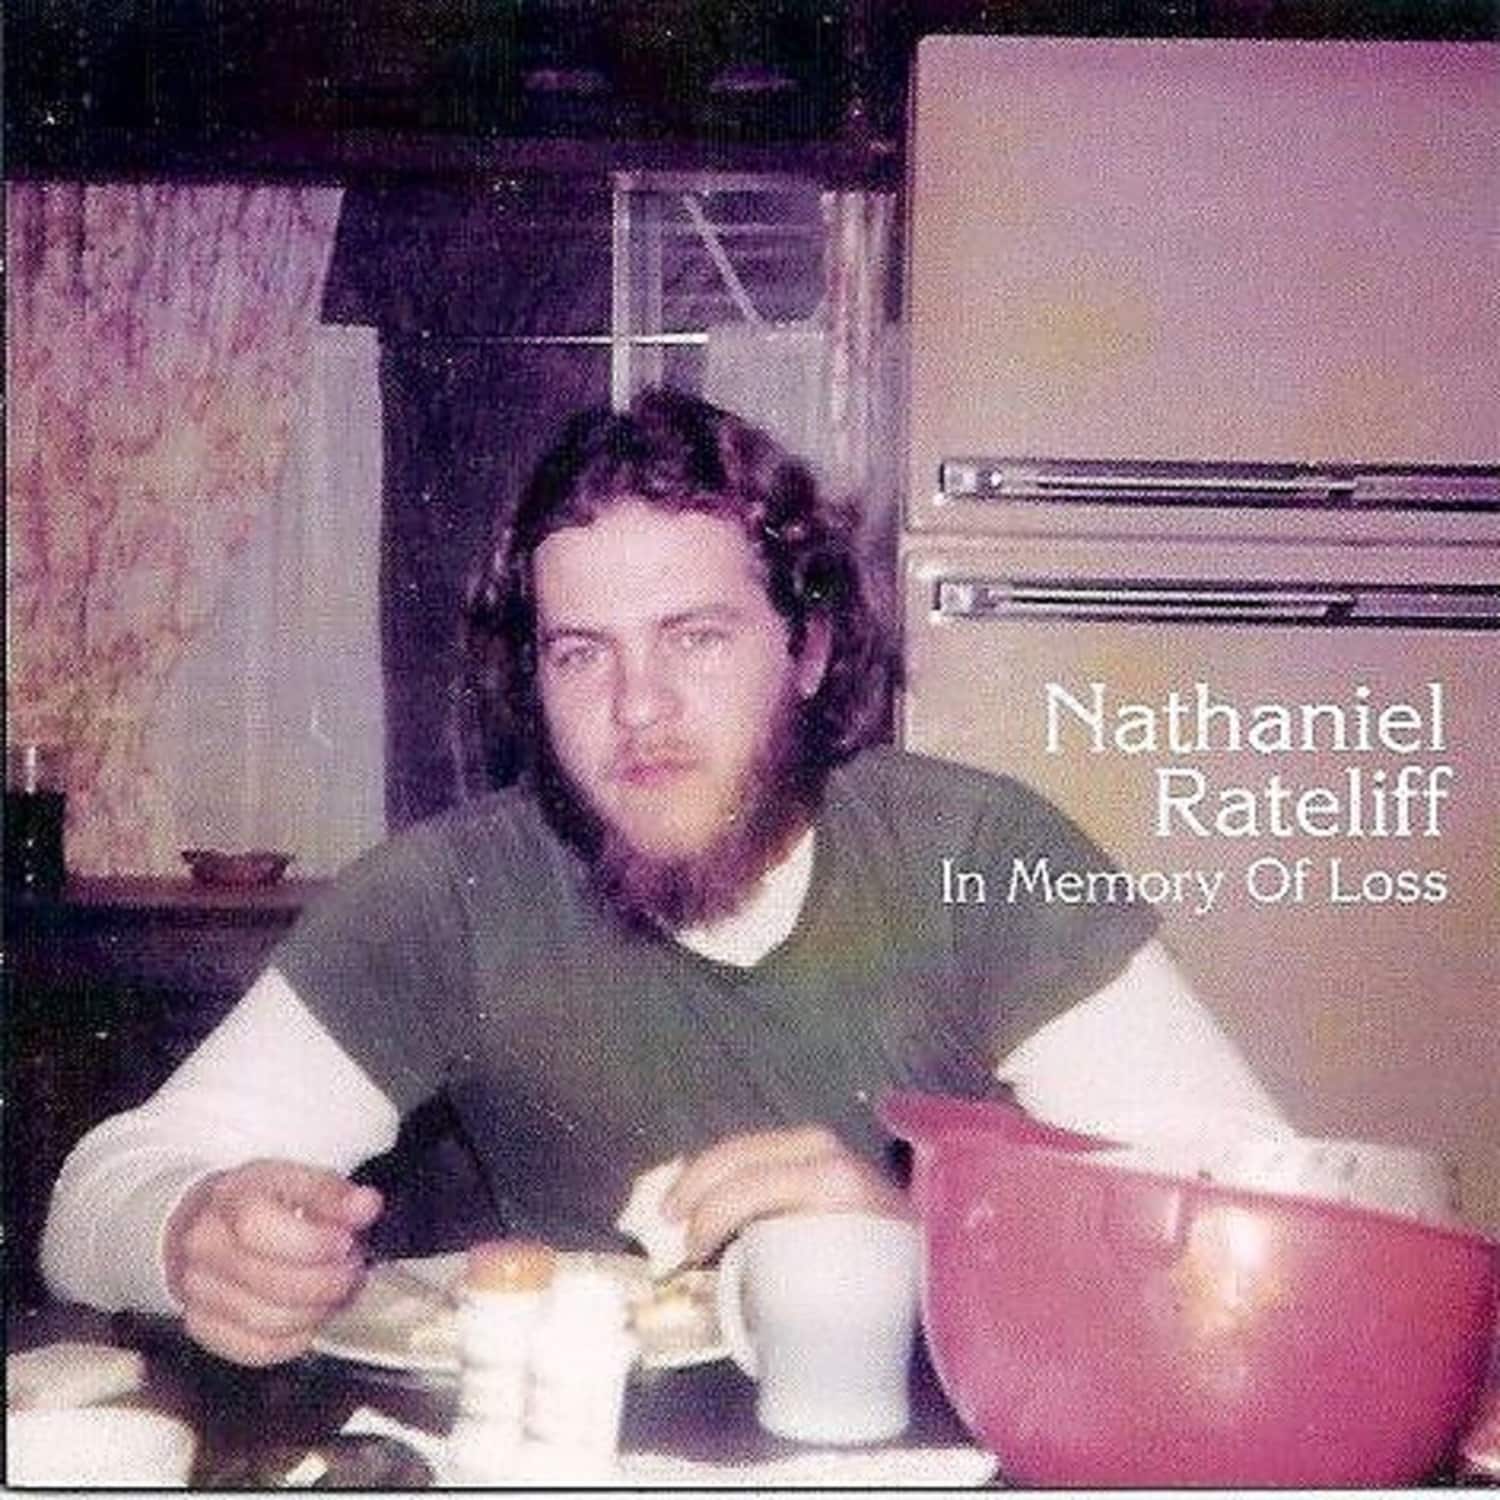 Nathaniel Rateliff - IN MEMORY OF LOSS 